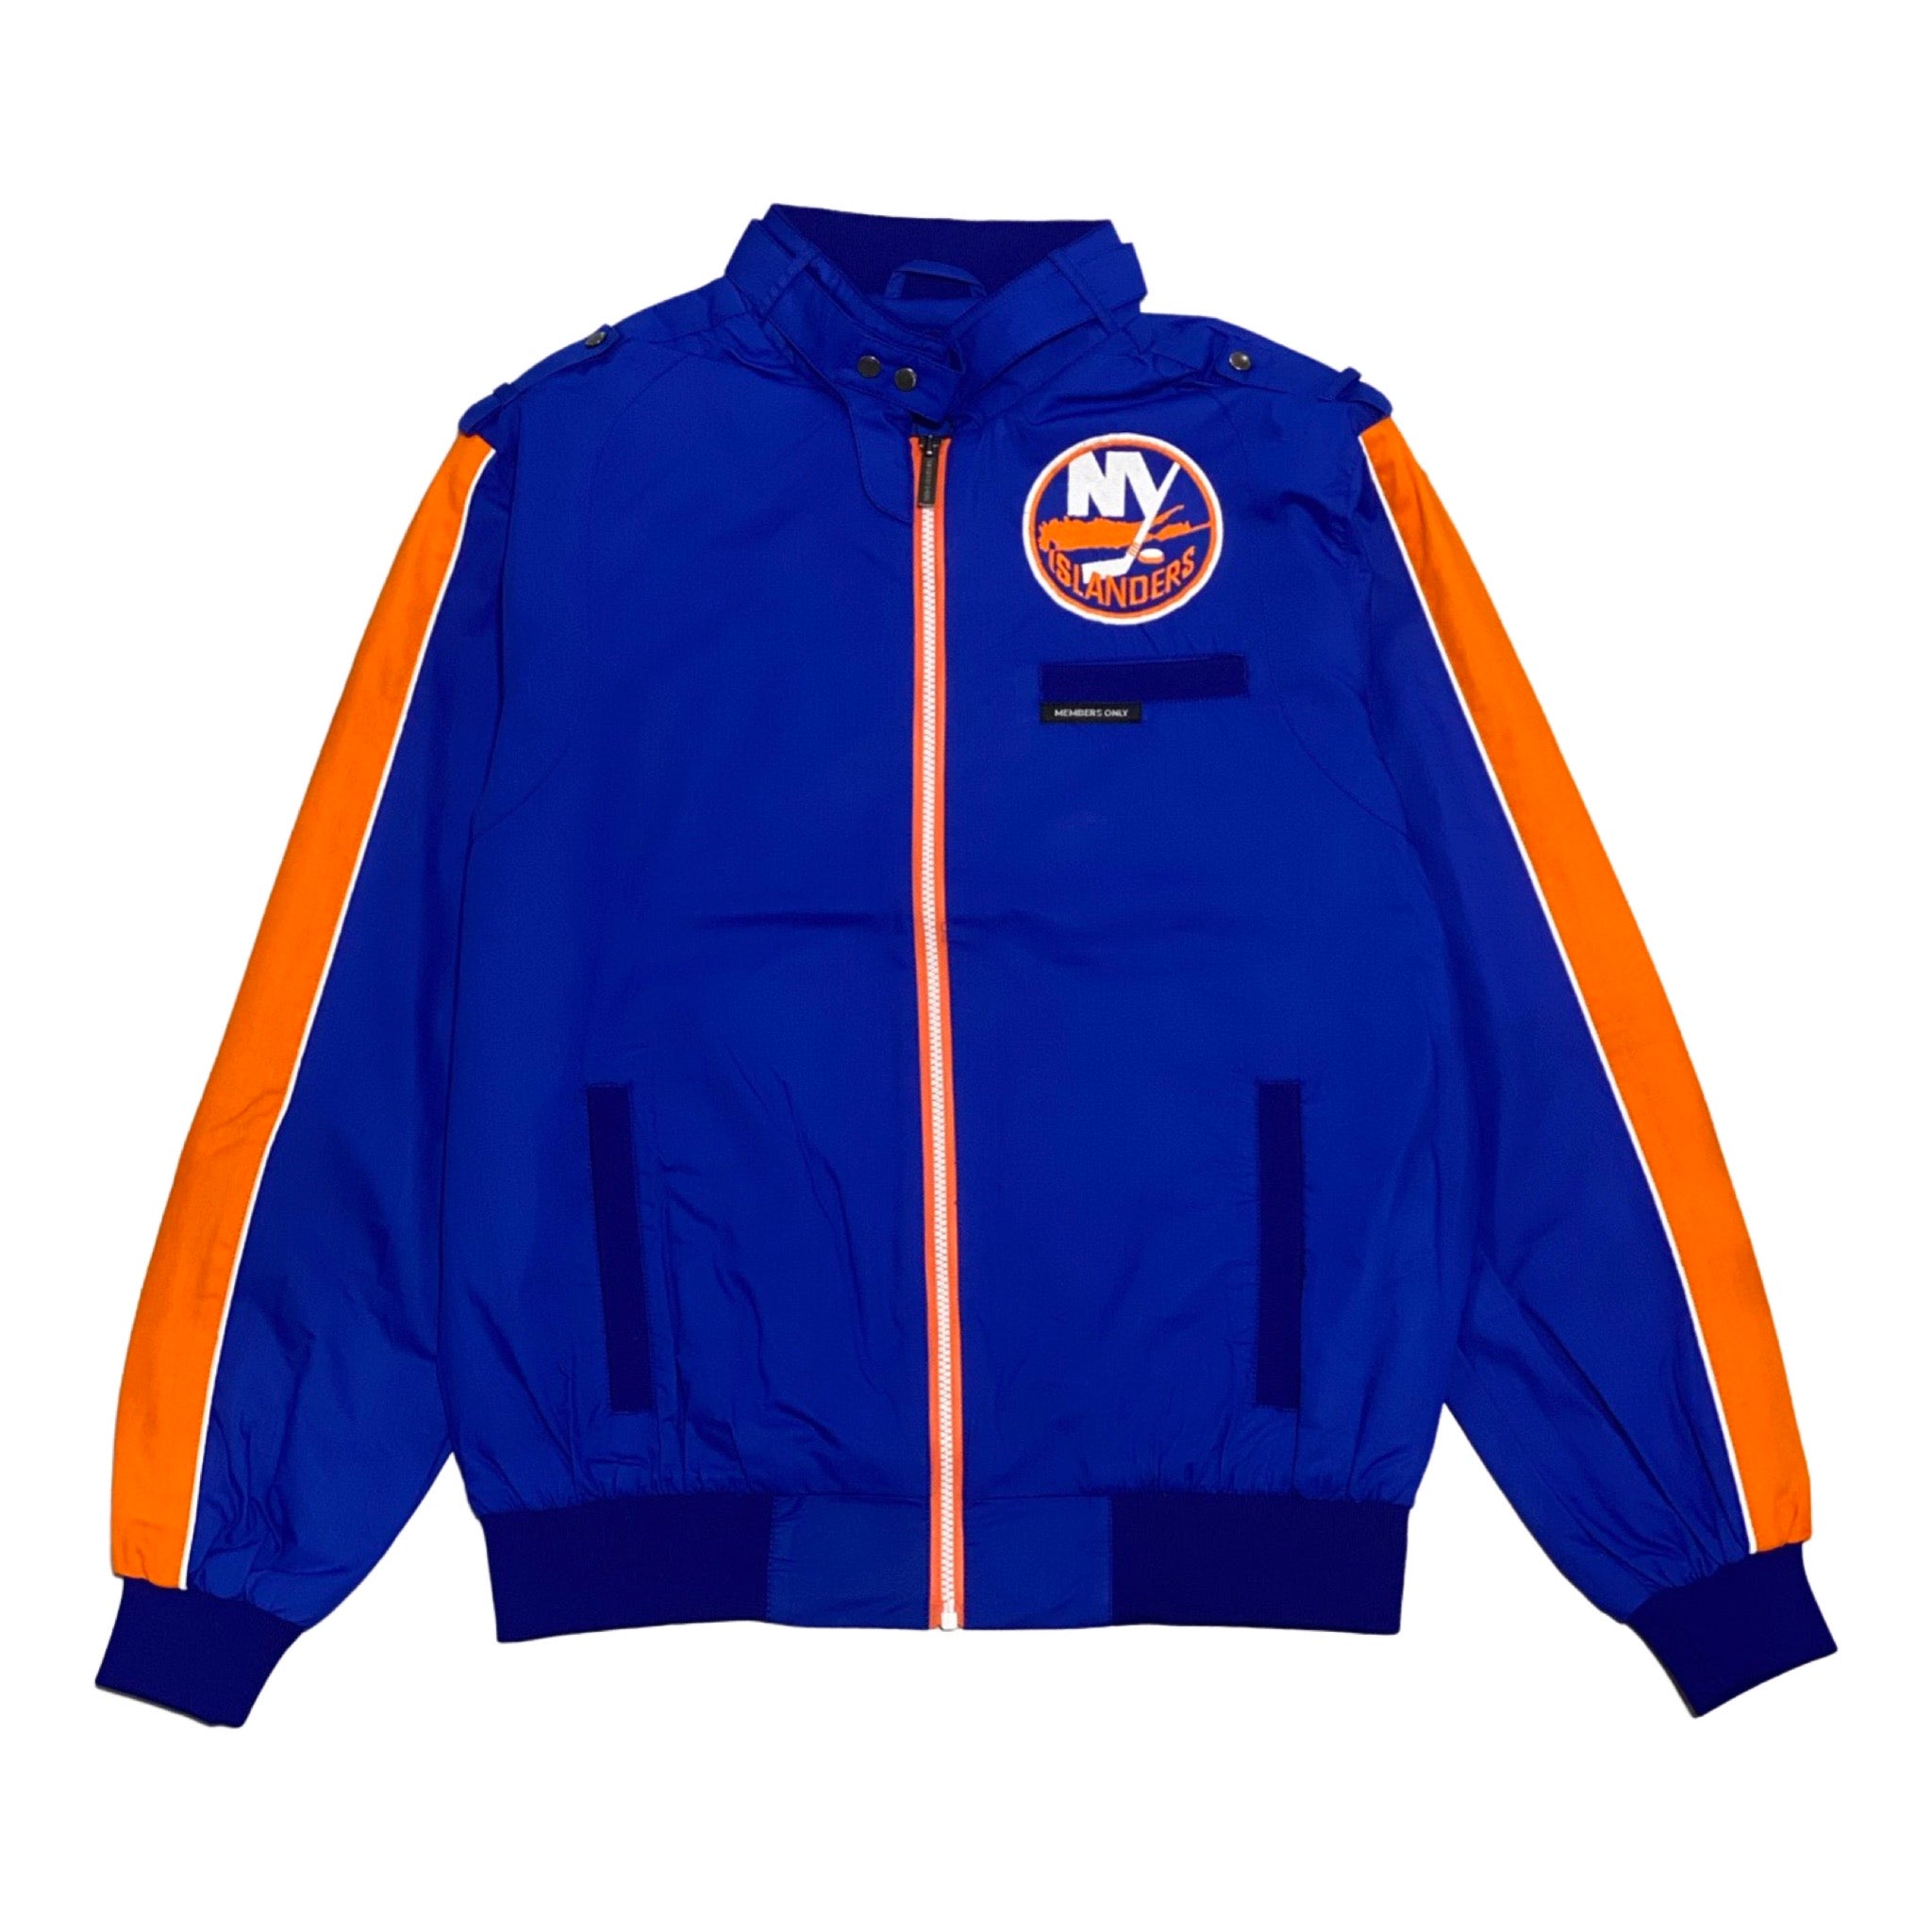 New York Islanders Reverse Retro, Join the wave and preorder yours today